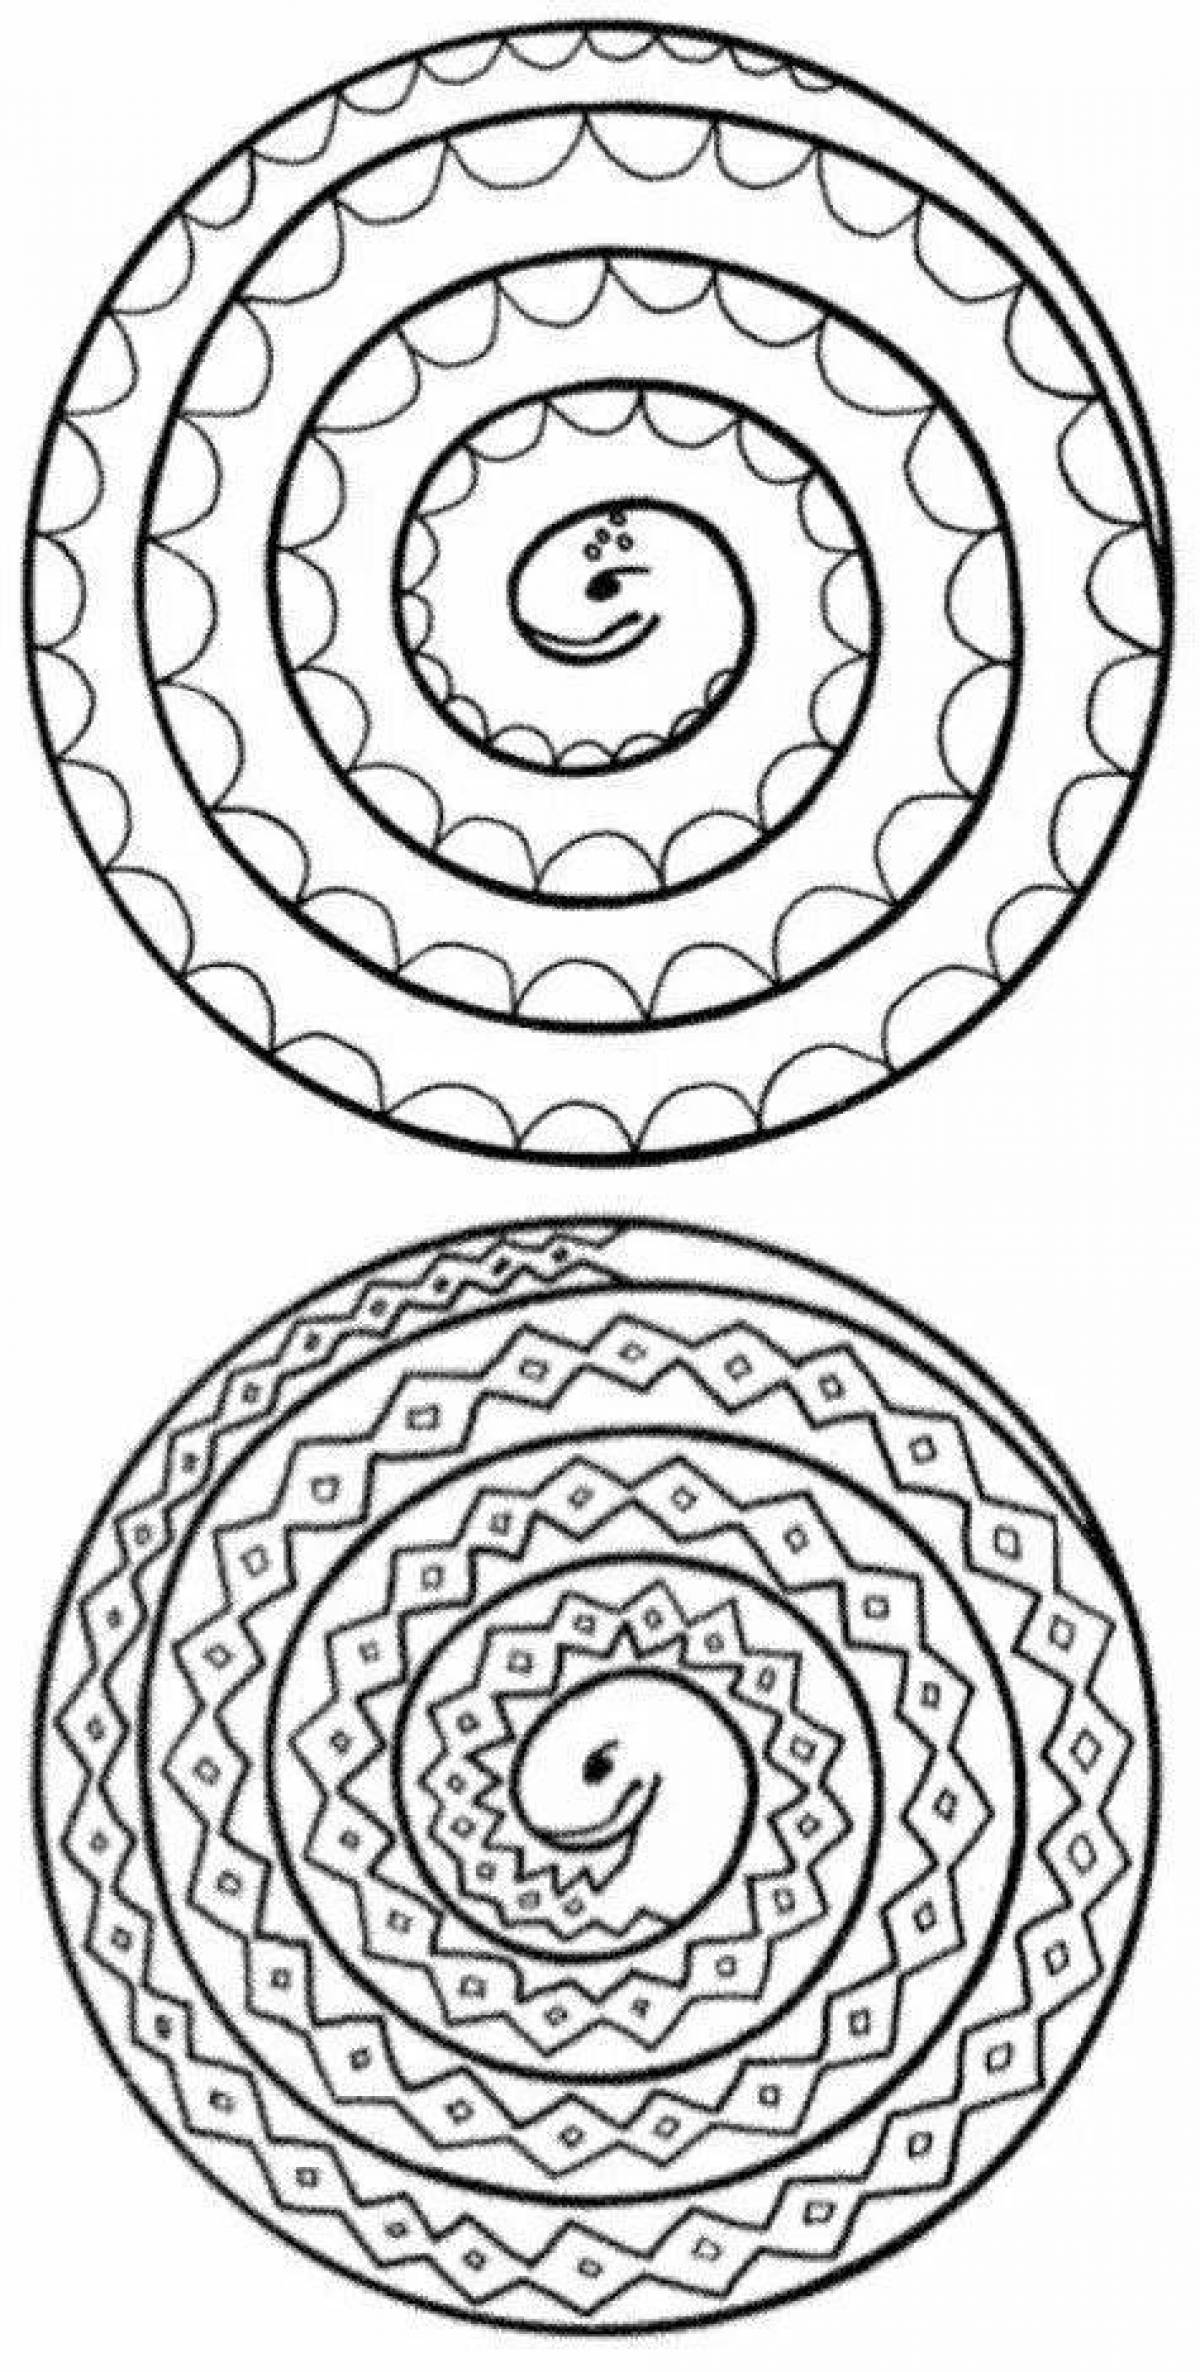 Playful round spiral coloring page